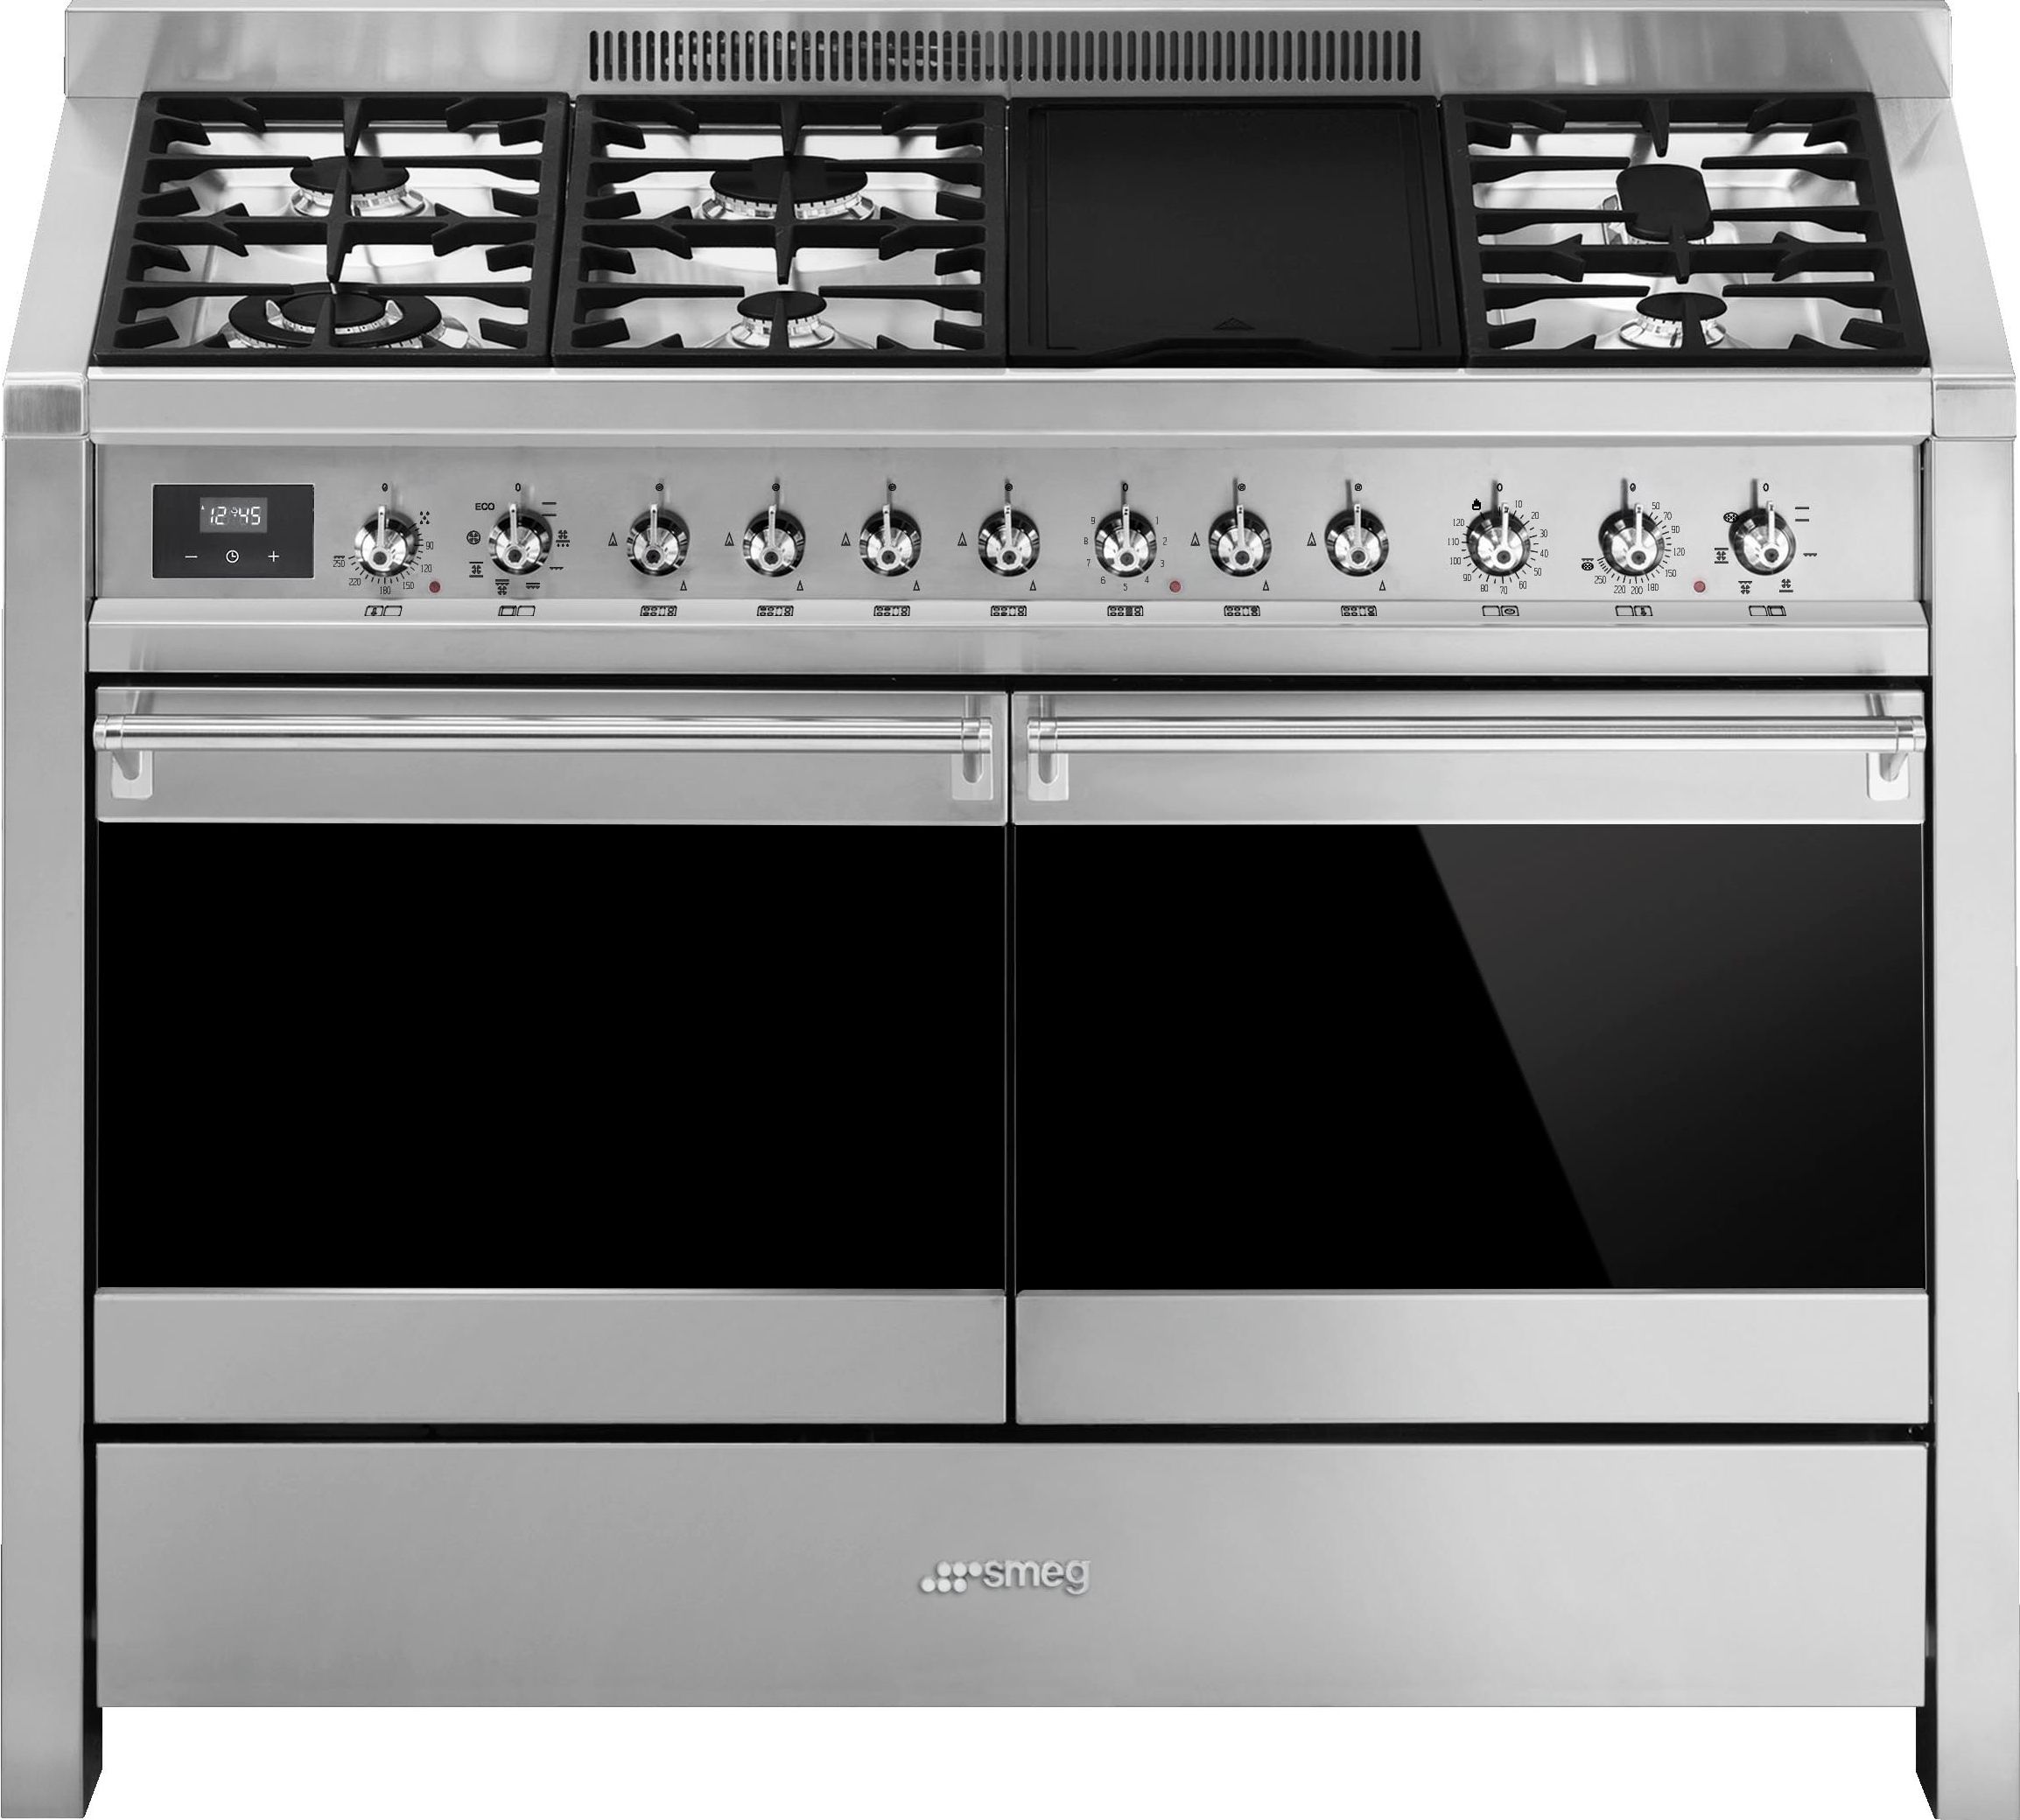 Smeg Opera A4-81 120cm Dual Fuel Range Cooker - Stainless Steel - A/B Rated, Stainless Steel